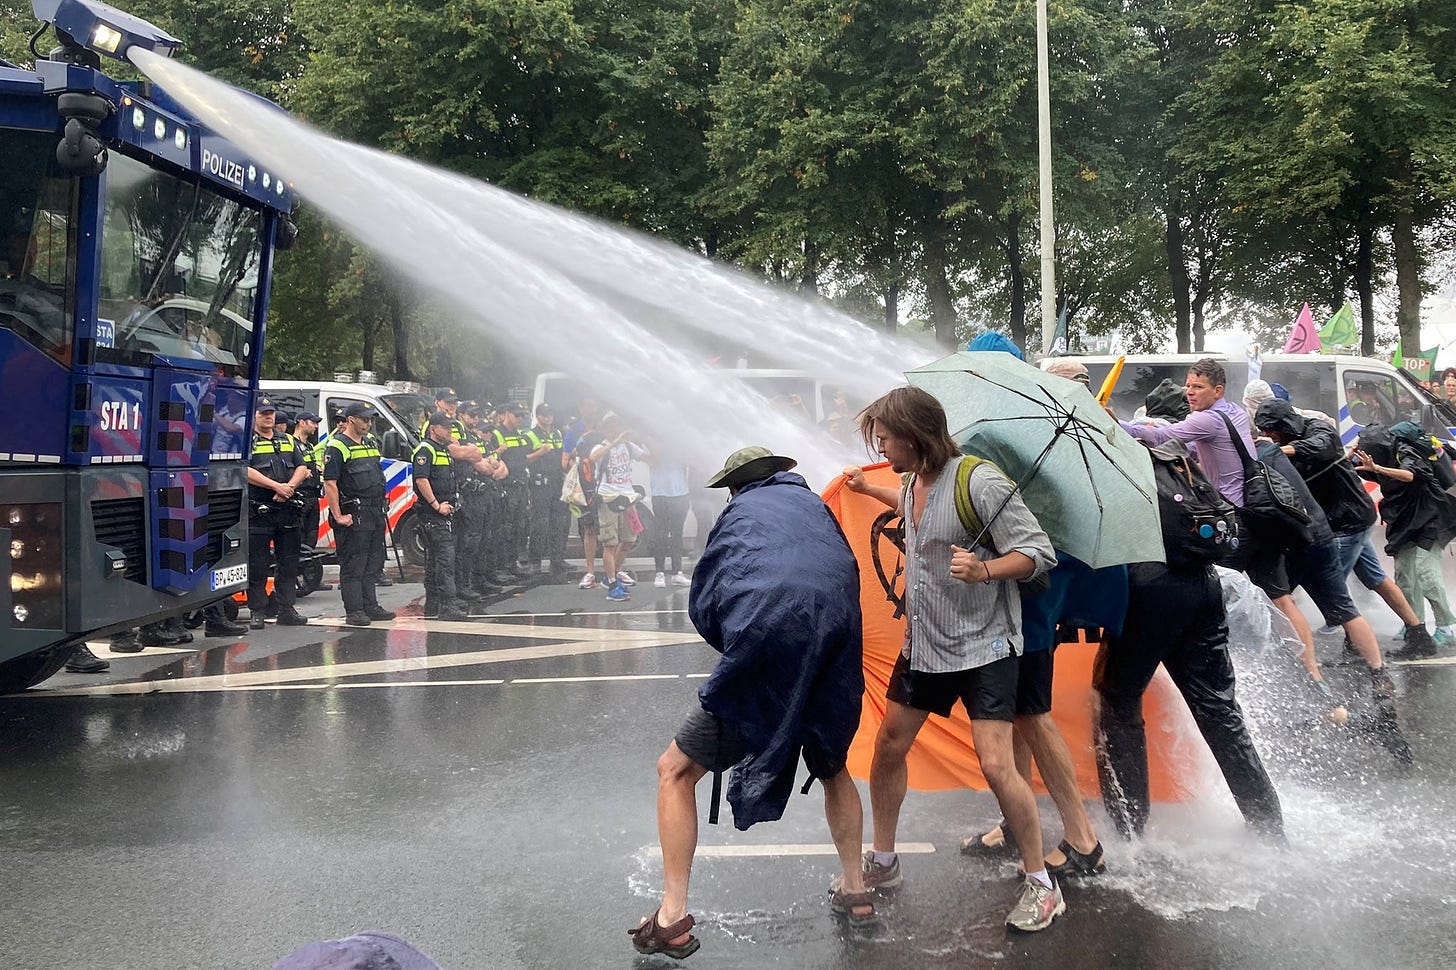 <p>Dutch police uses water cannon to clear climate activists from the highway in The Hague, Netherlands</p>